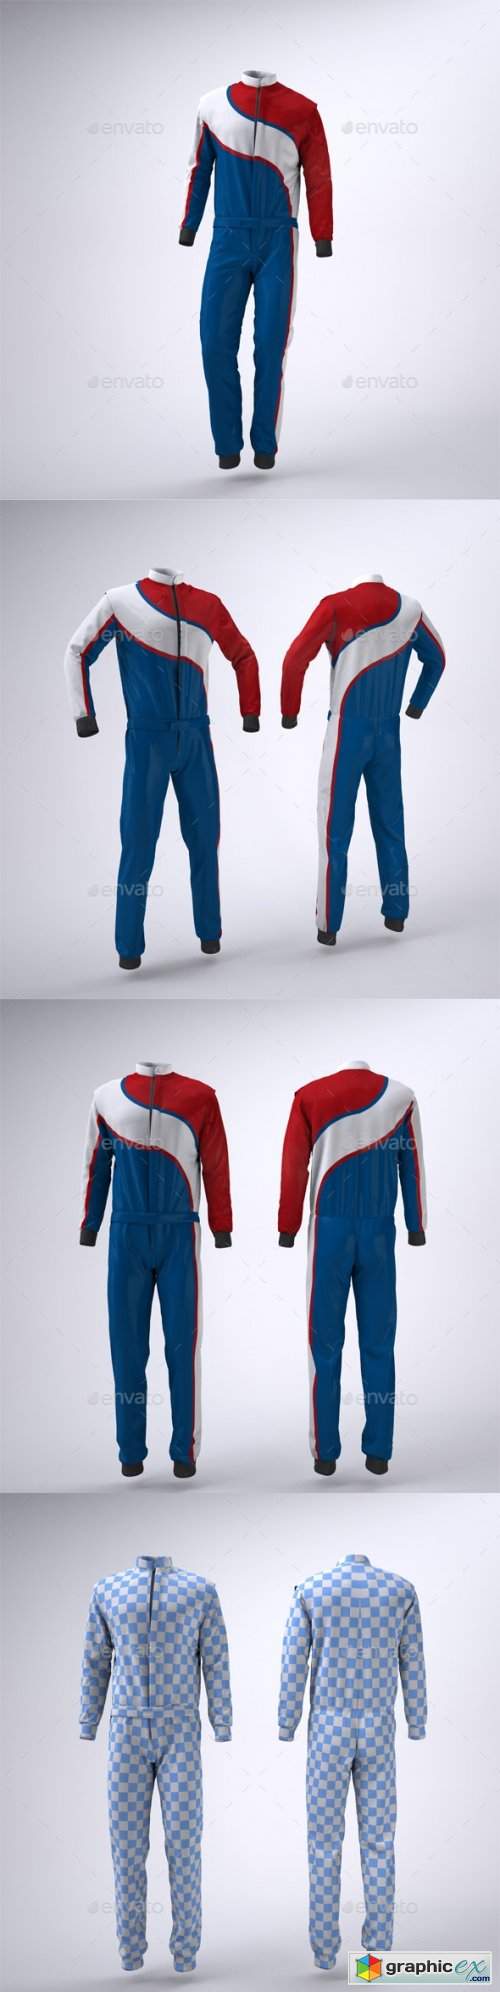 Driving, Racing Suit Mock-Up